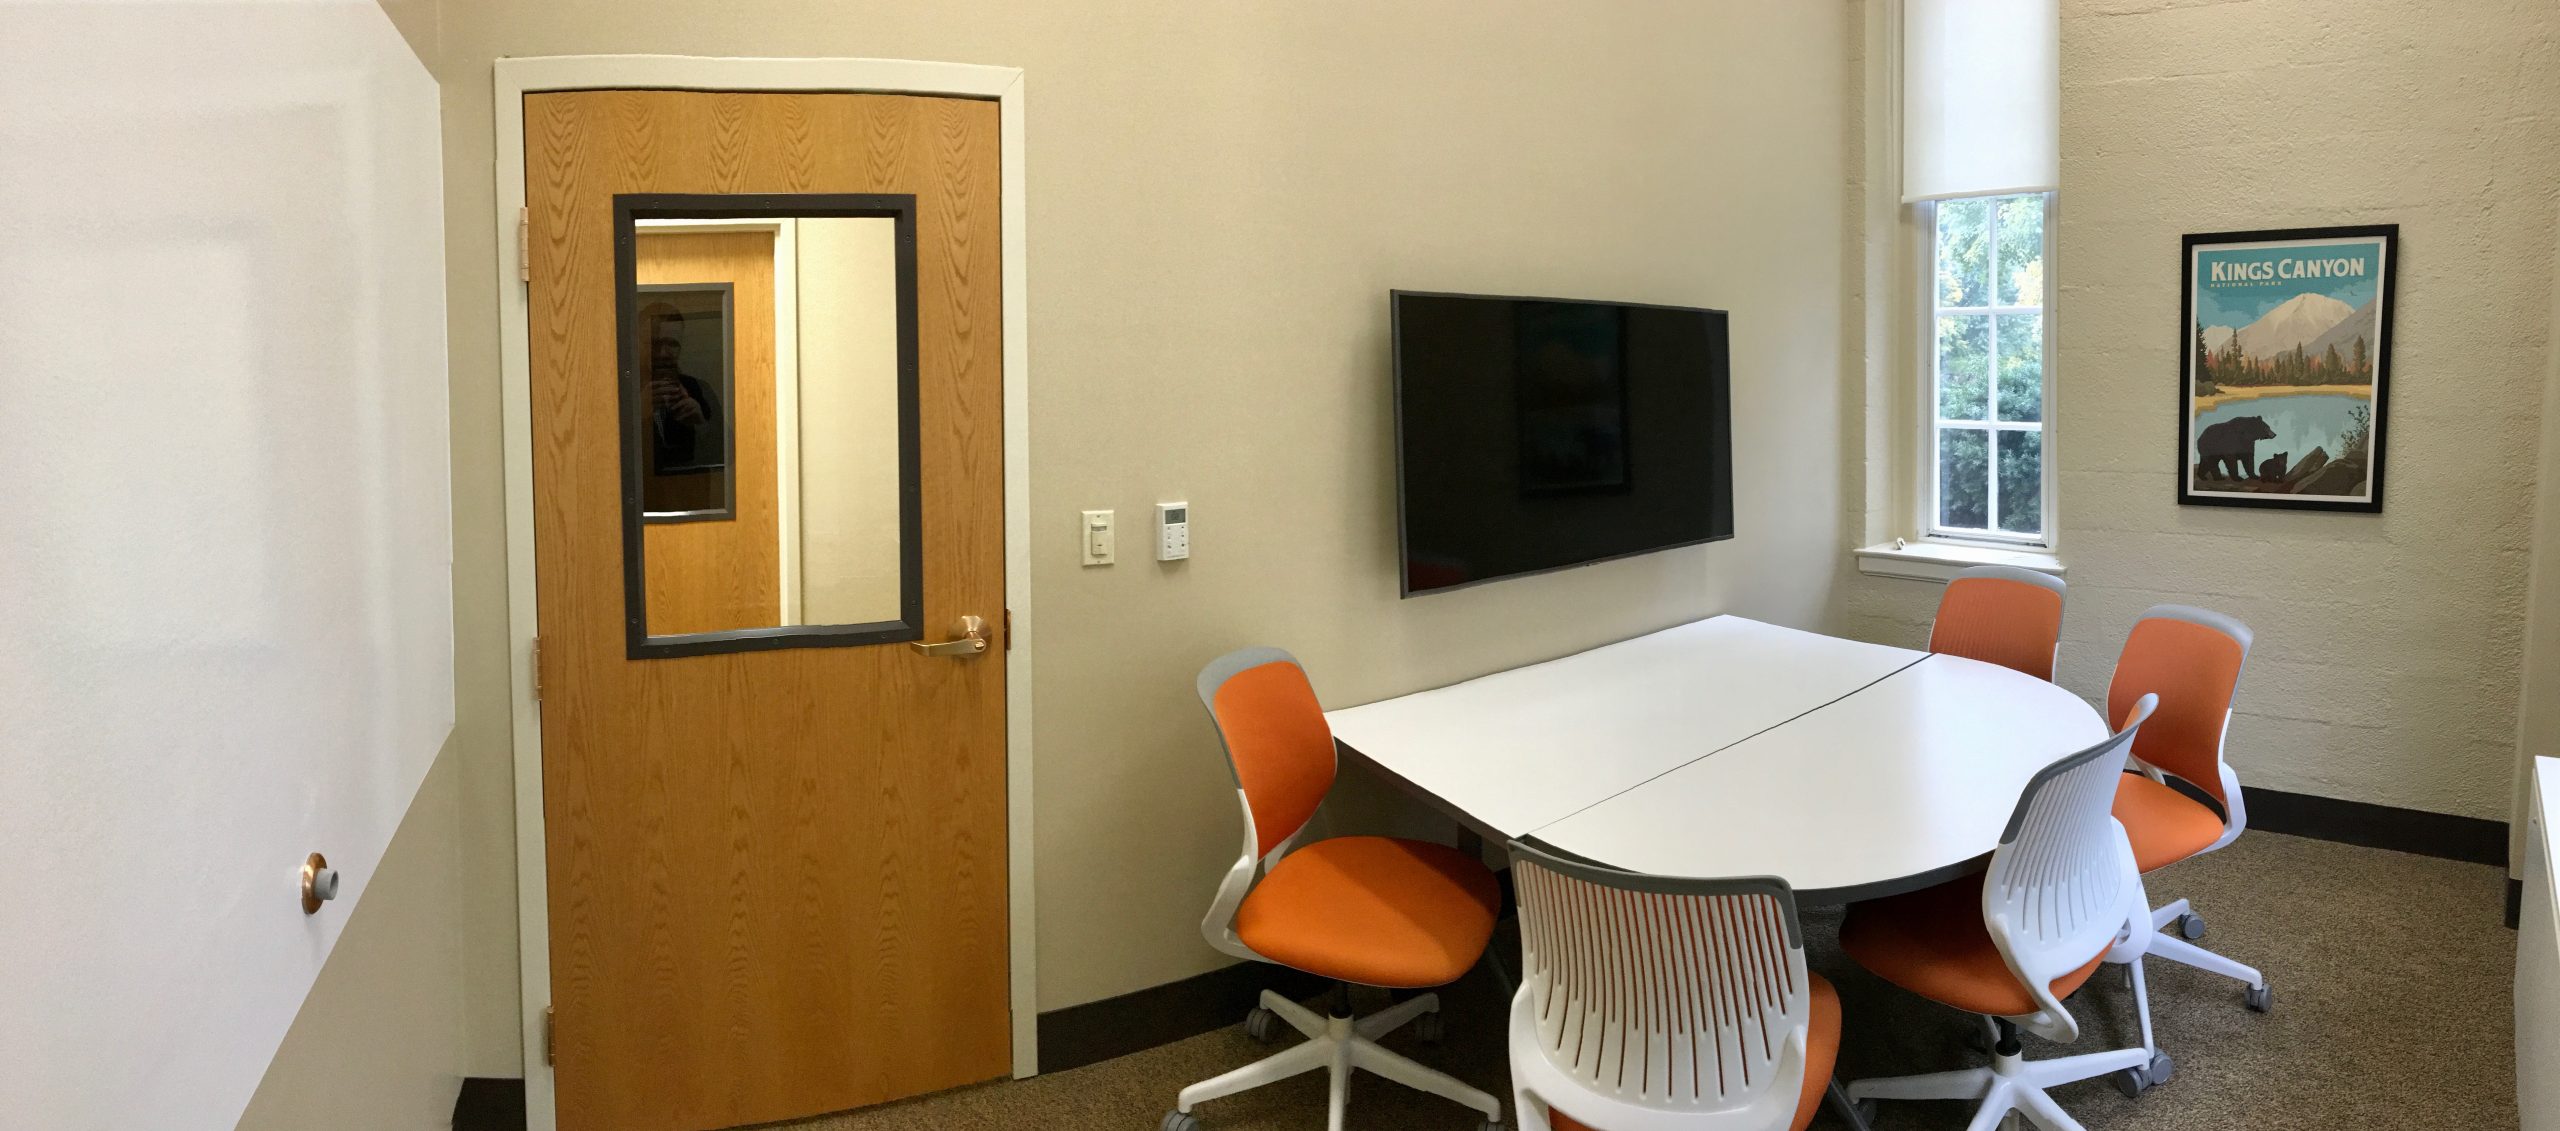 A study room with a table, mounted screen, whiteboards, and five chairs